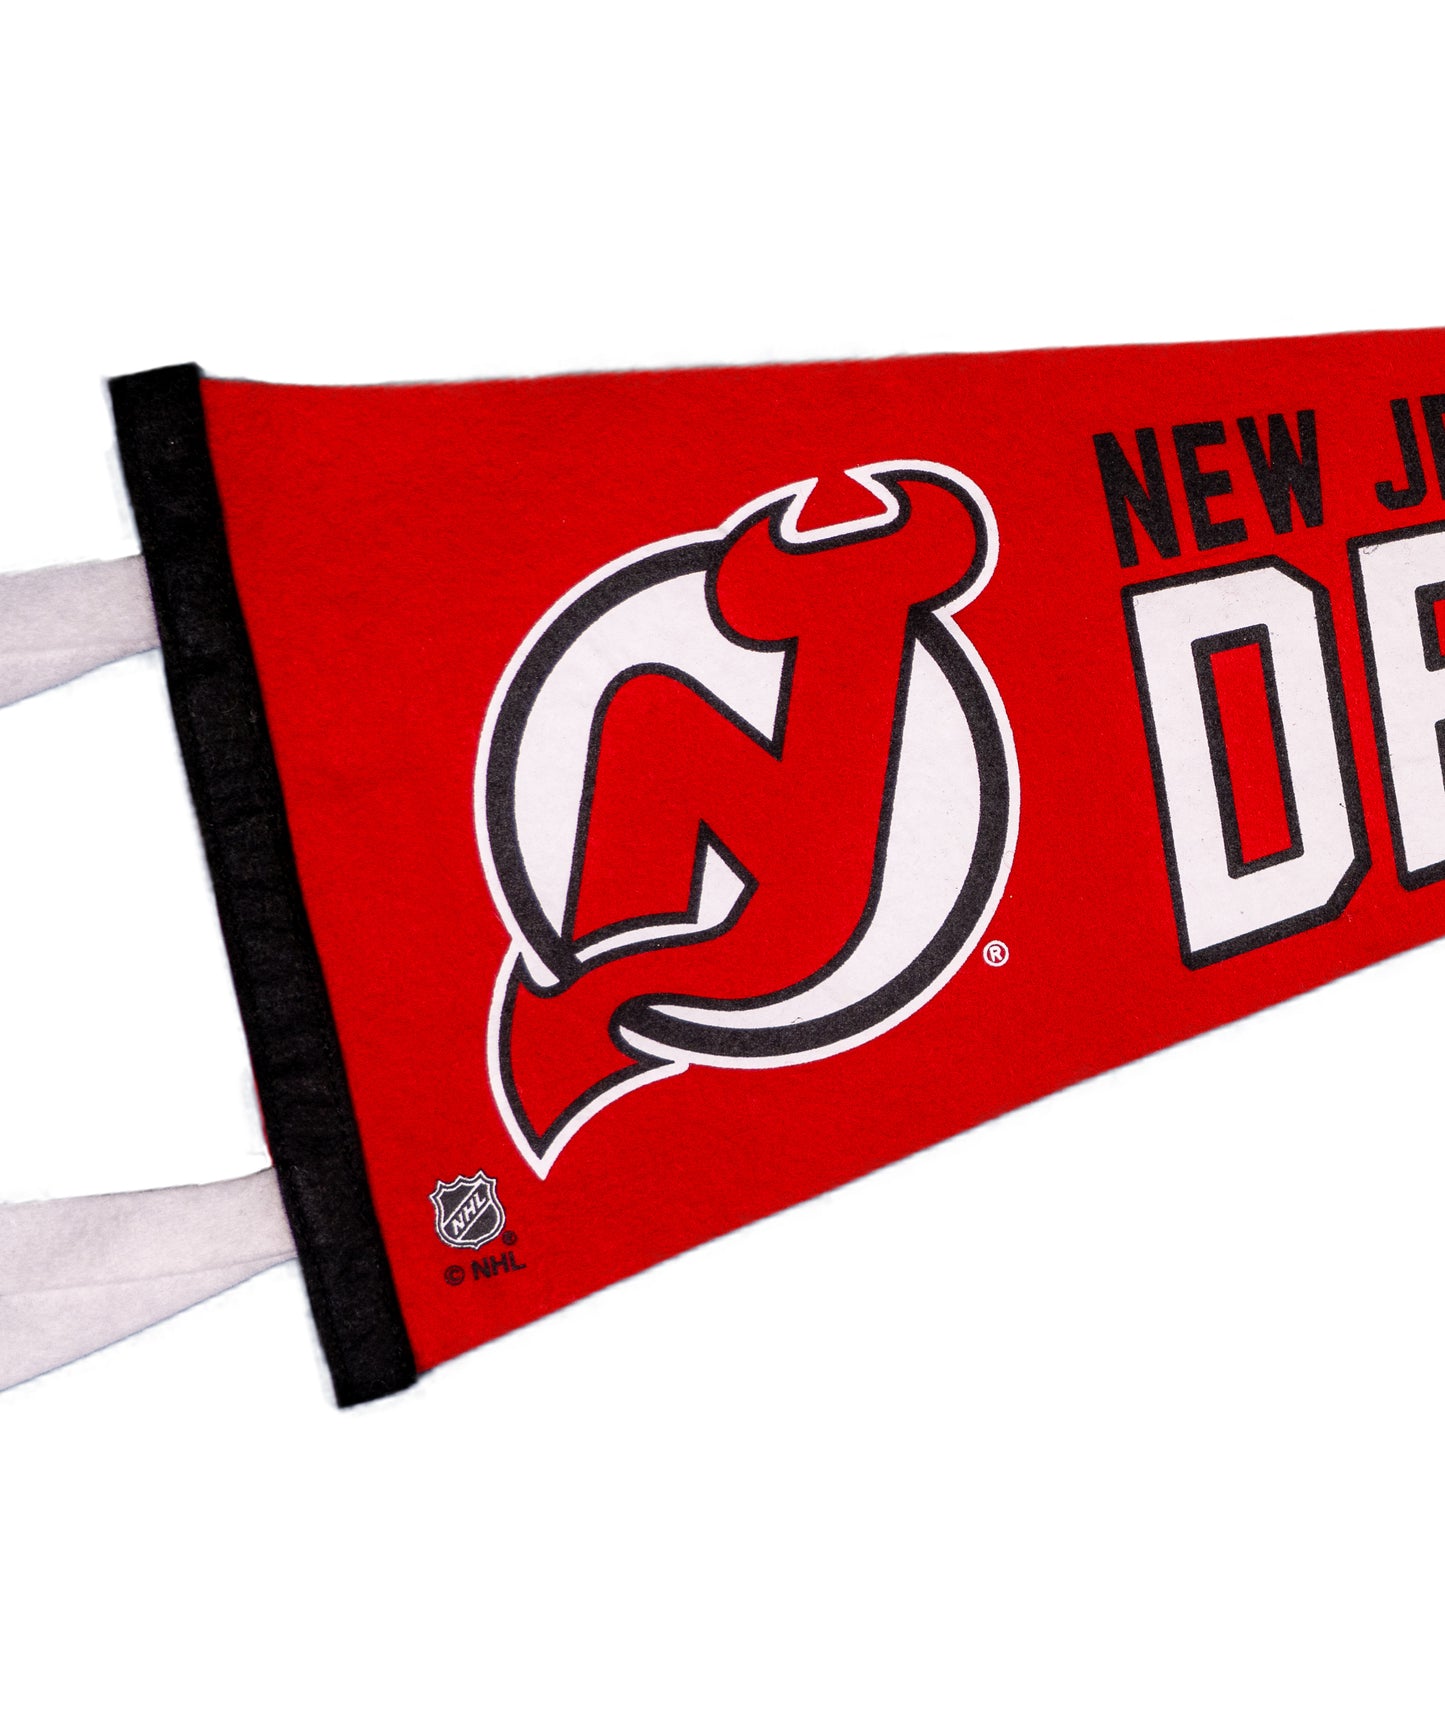 New Jersey Devils Pennant • NHL x Oxford Pennant